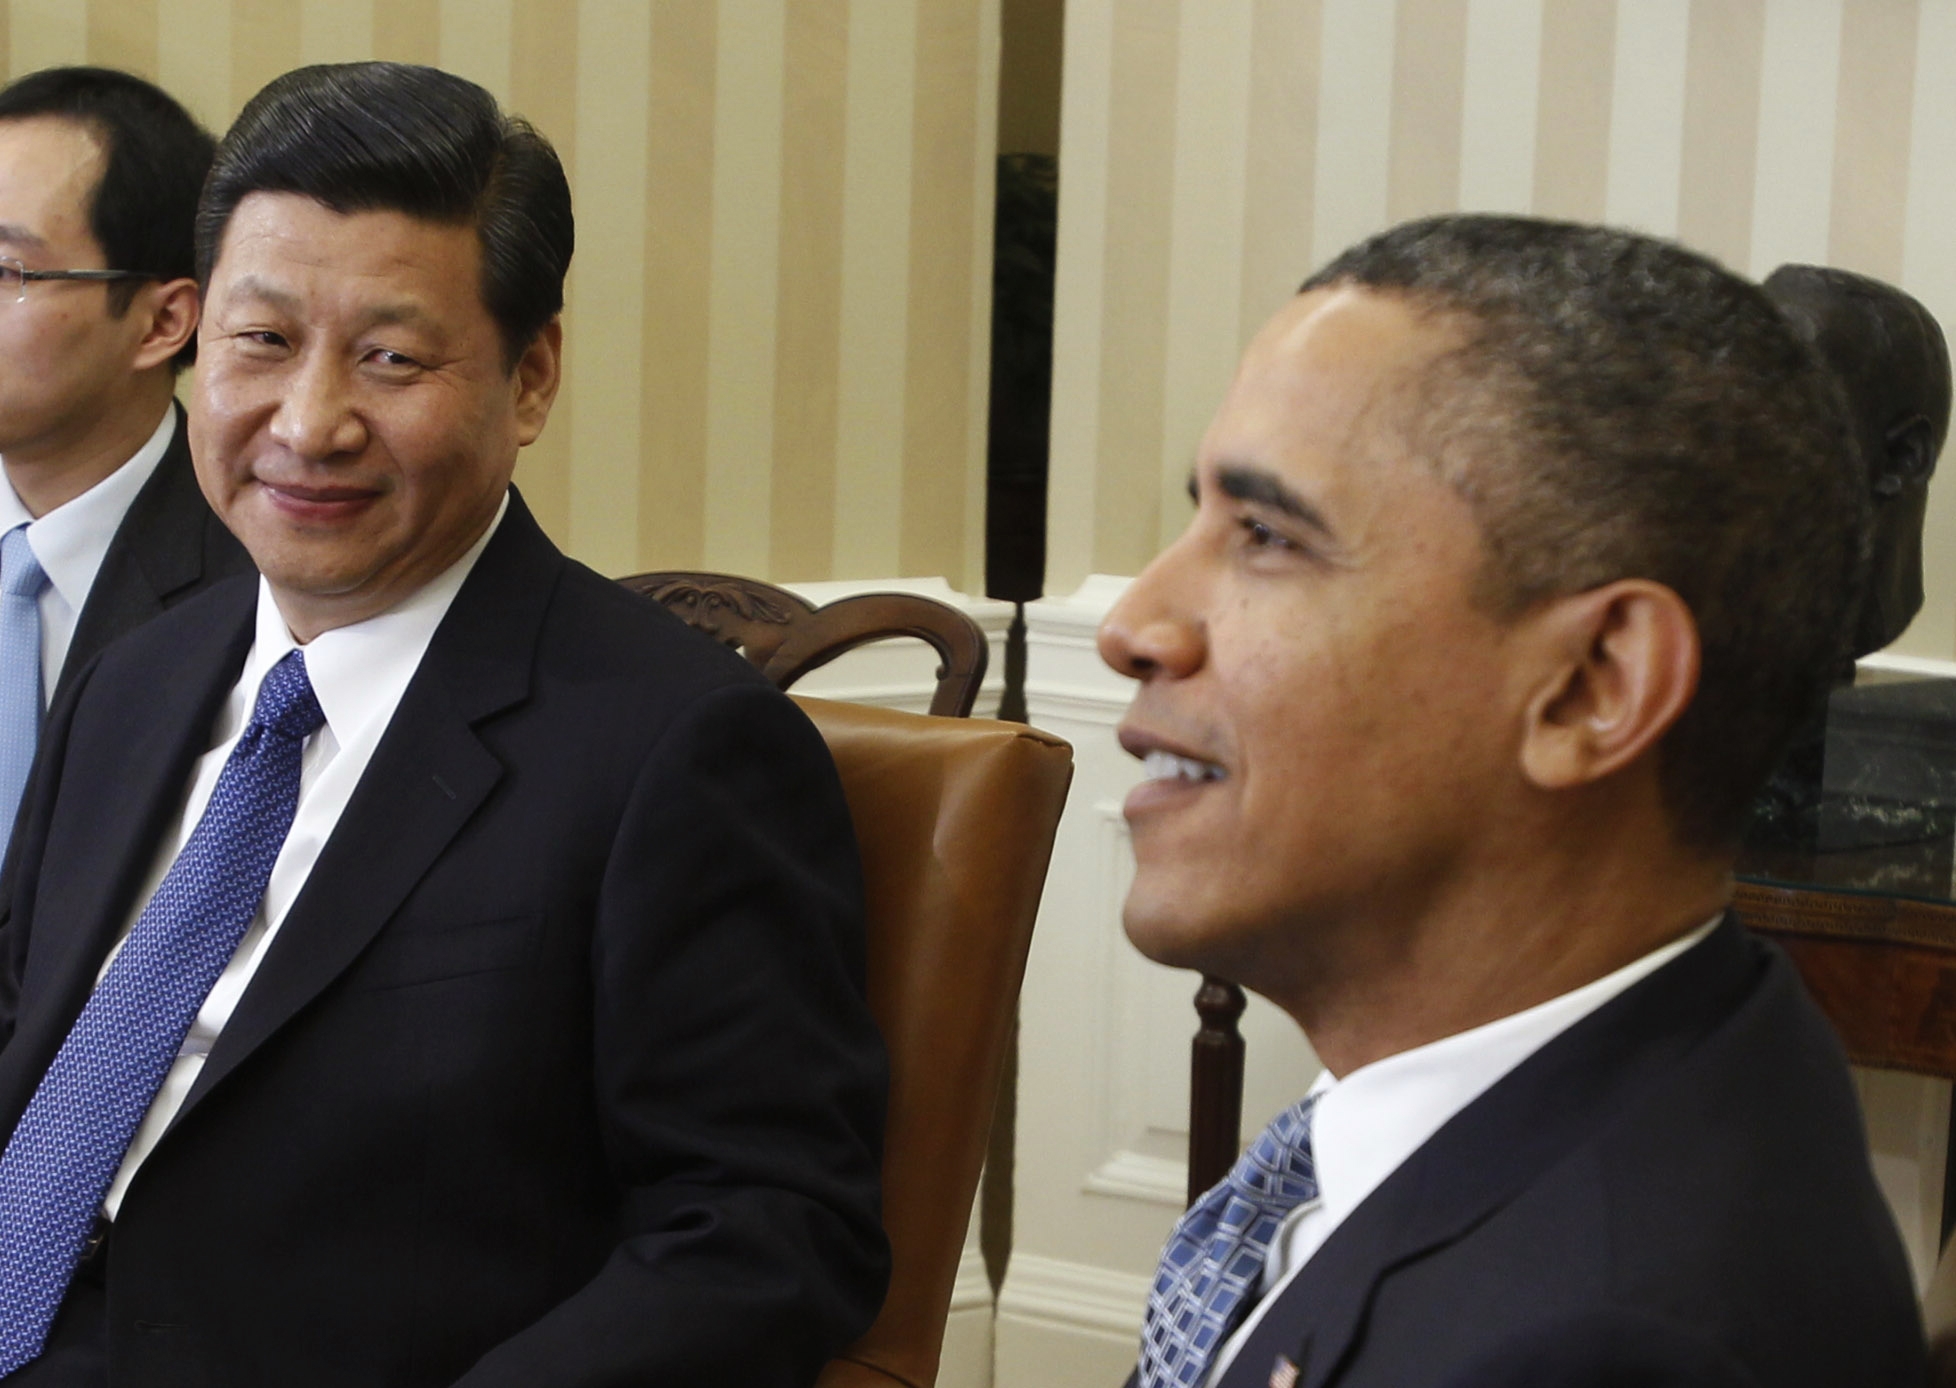 Obama told the Chinese president that he wanted to take the relationship â€œto a new level.â€-NYT